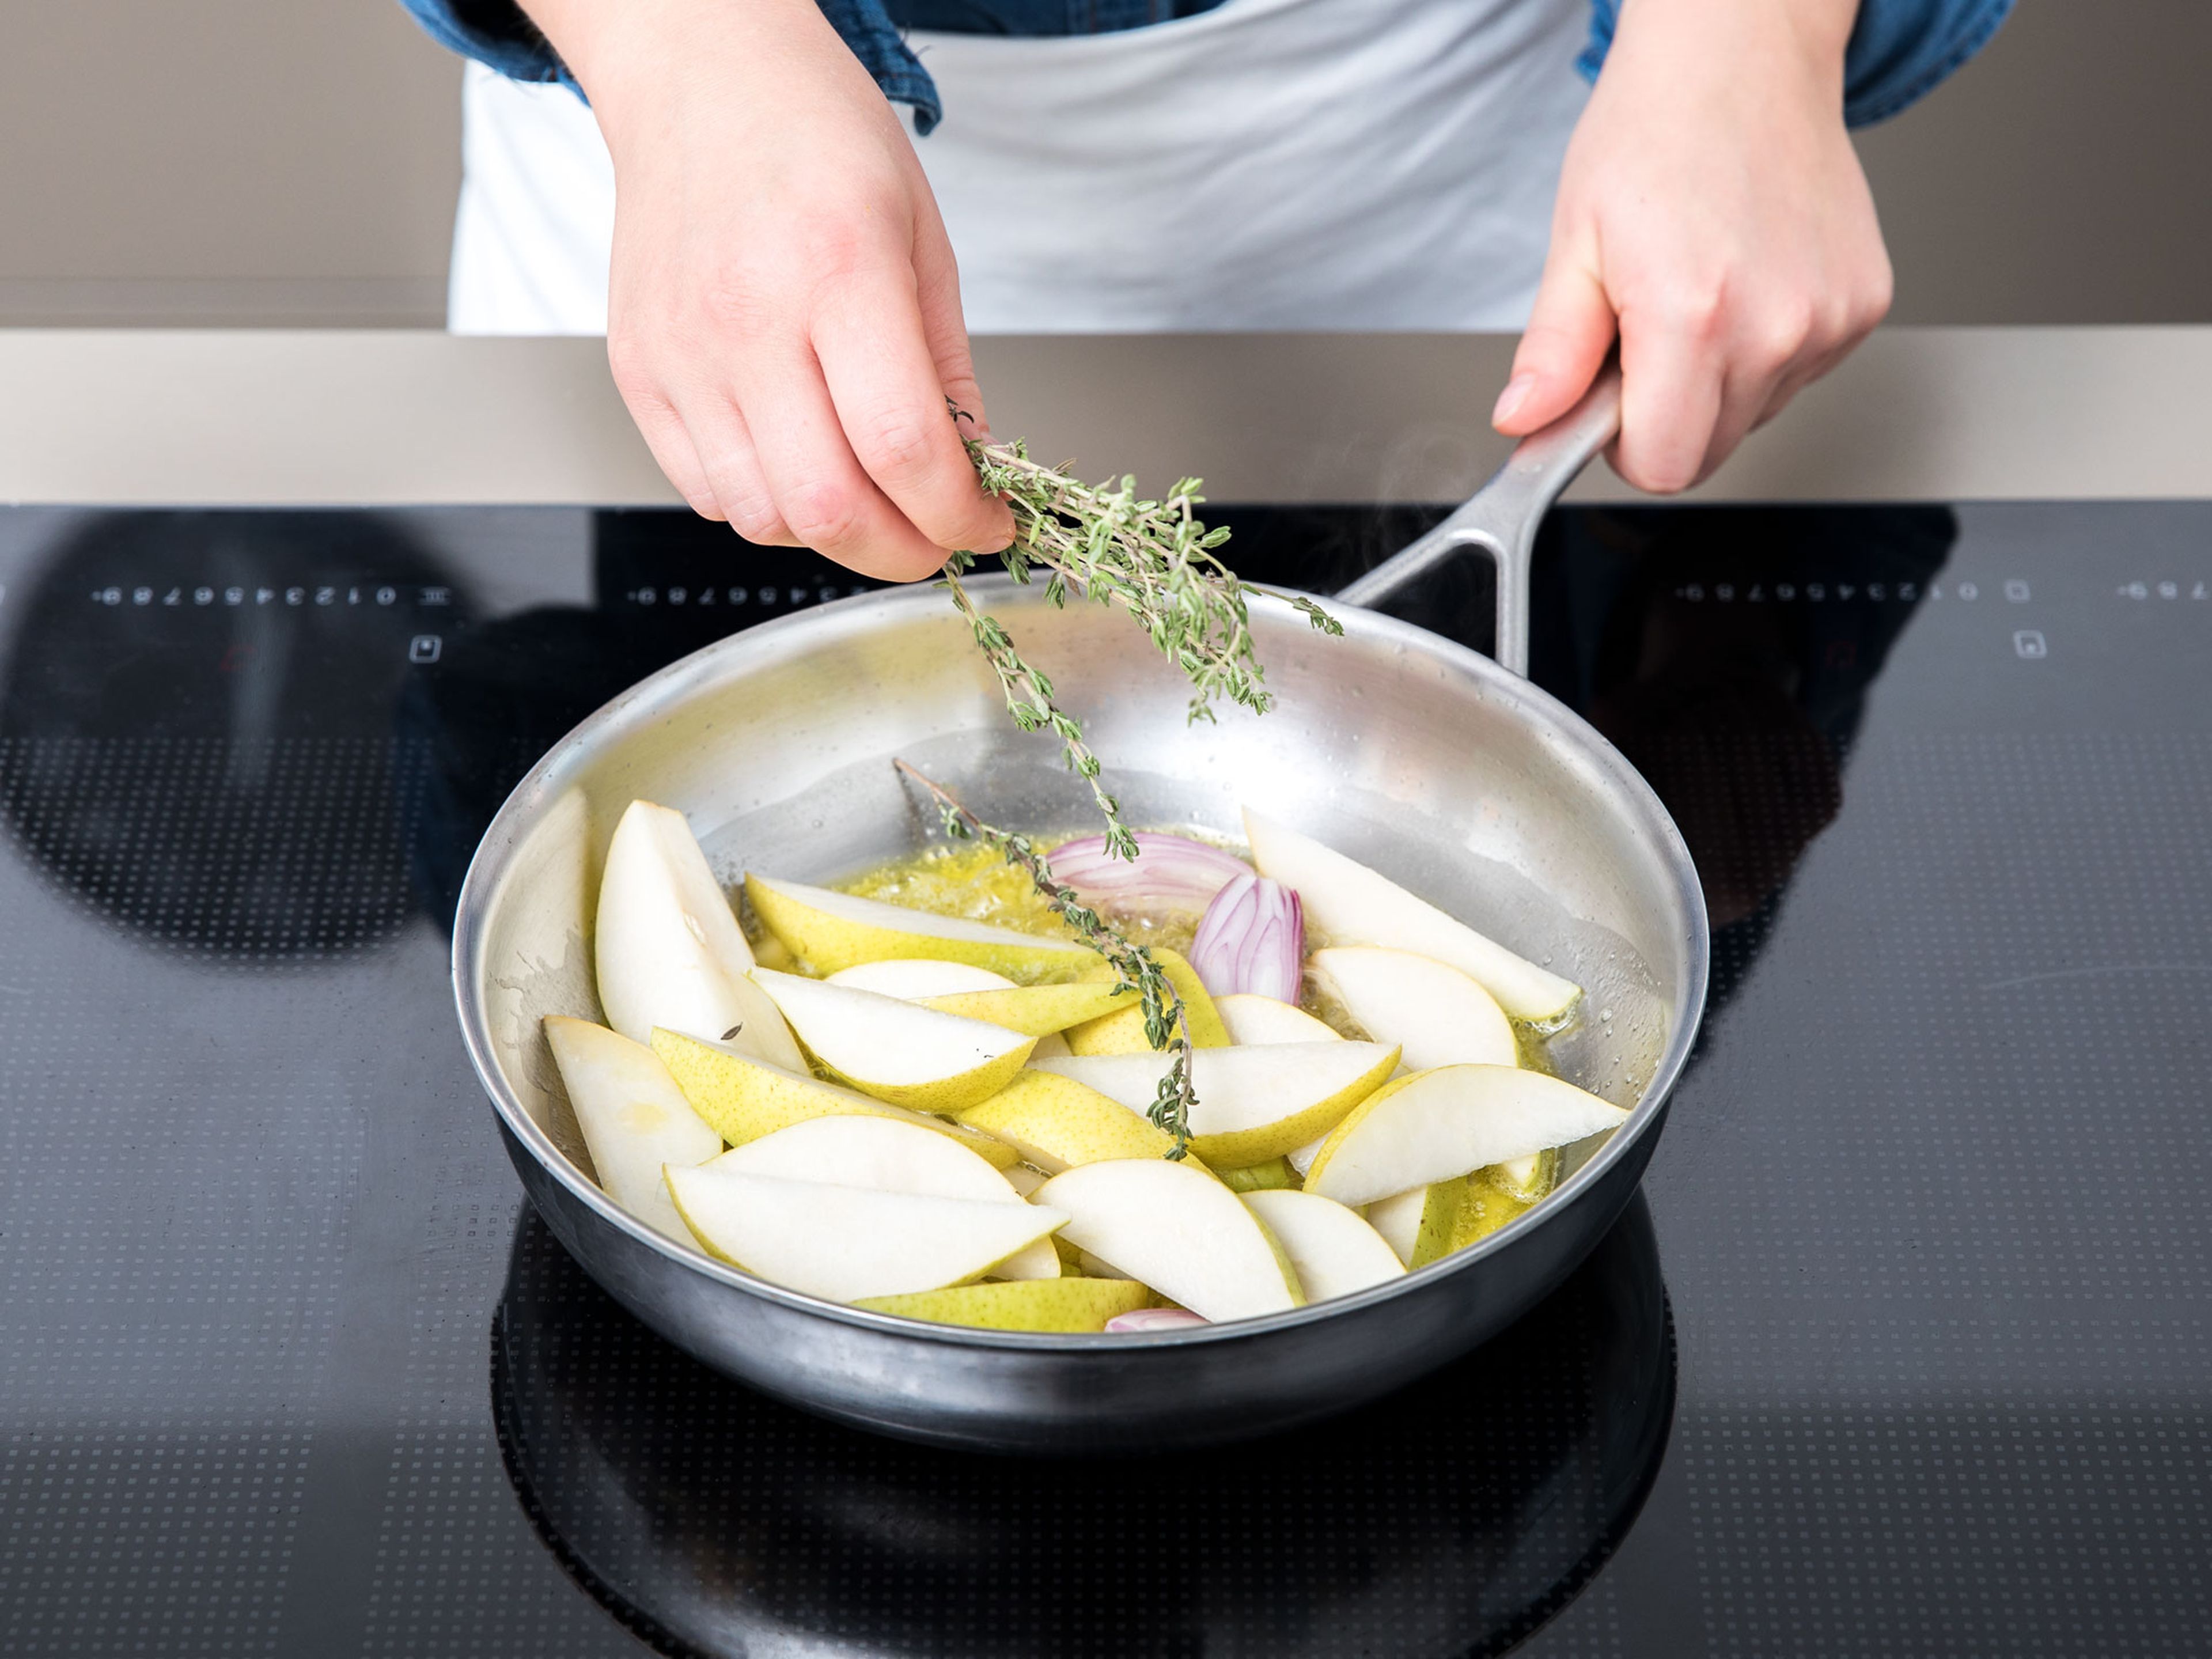 In a second pan, heat the butter and olive oil and add sliced pears, shallots, and thyme sprigs and sauté for approx. 5 min. Season with salt and pepper. Add the orange liqueur and let simmer for approx. 30 sec. more.